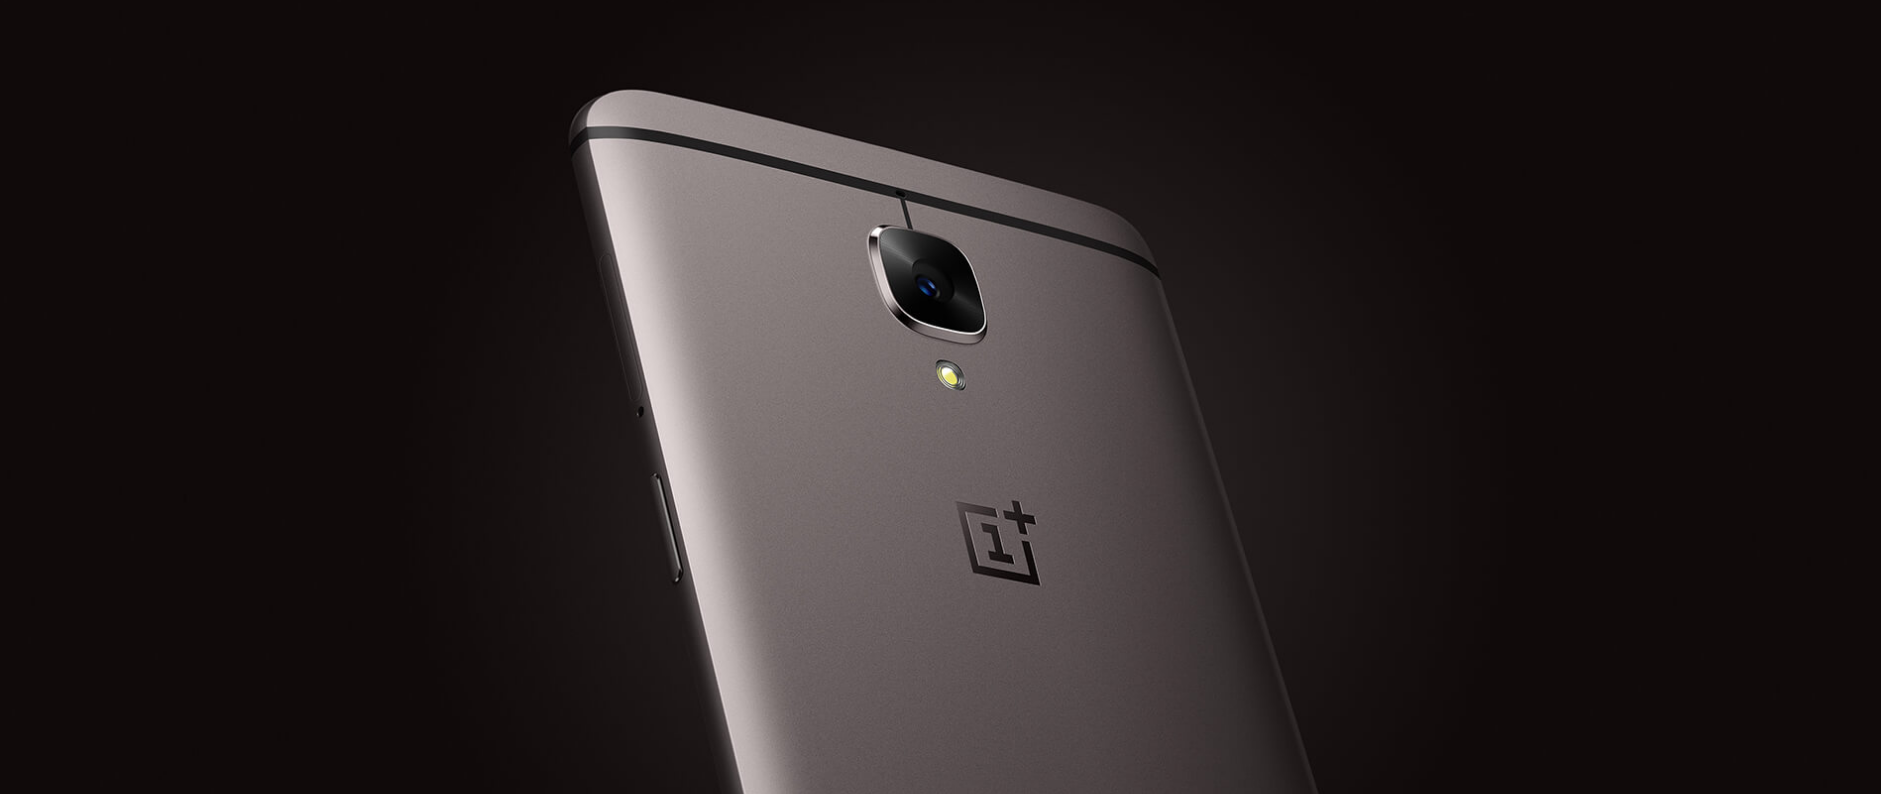 The OnePlus 3T is official with updated specs and starting price of $439